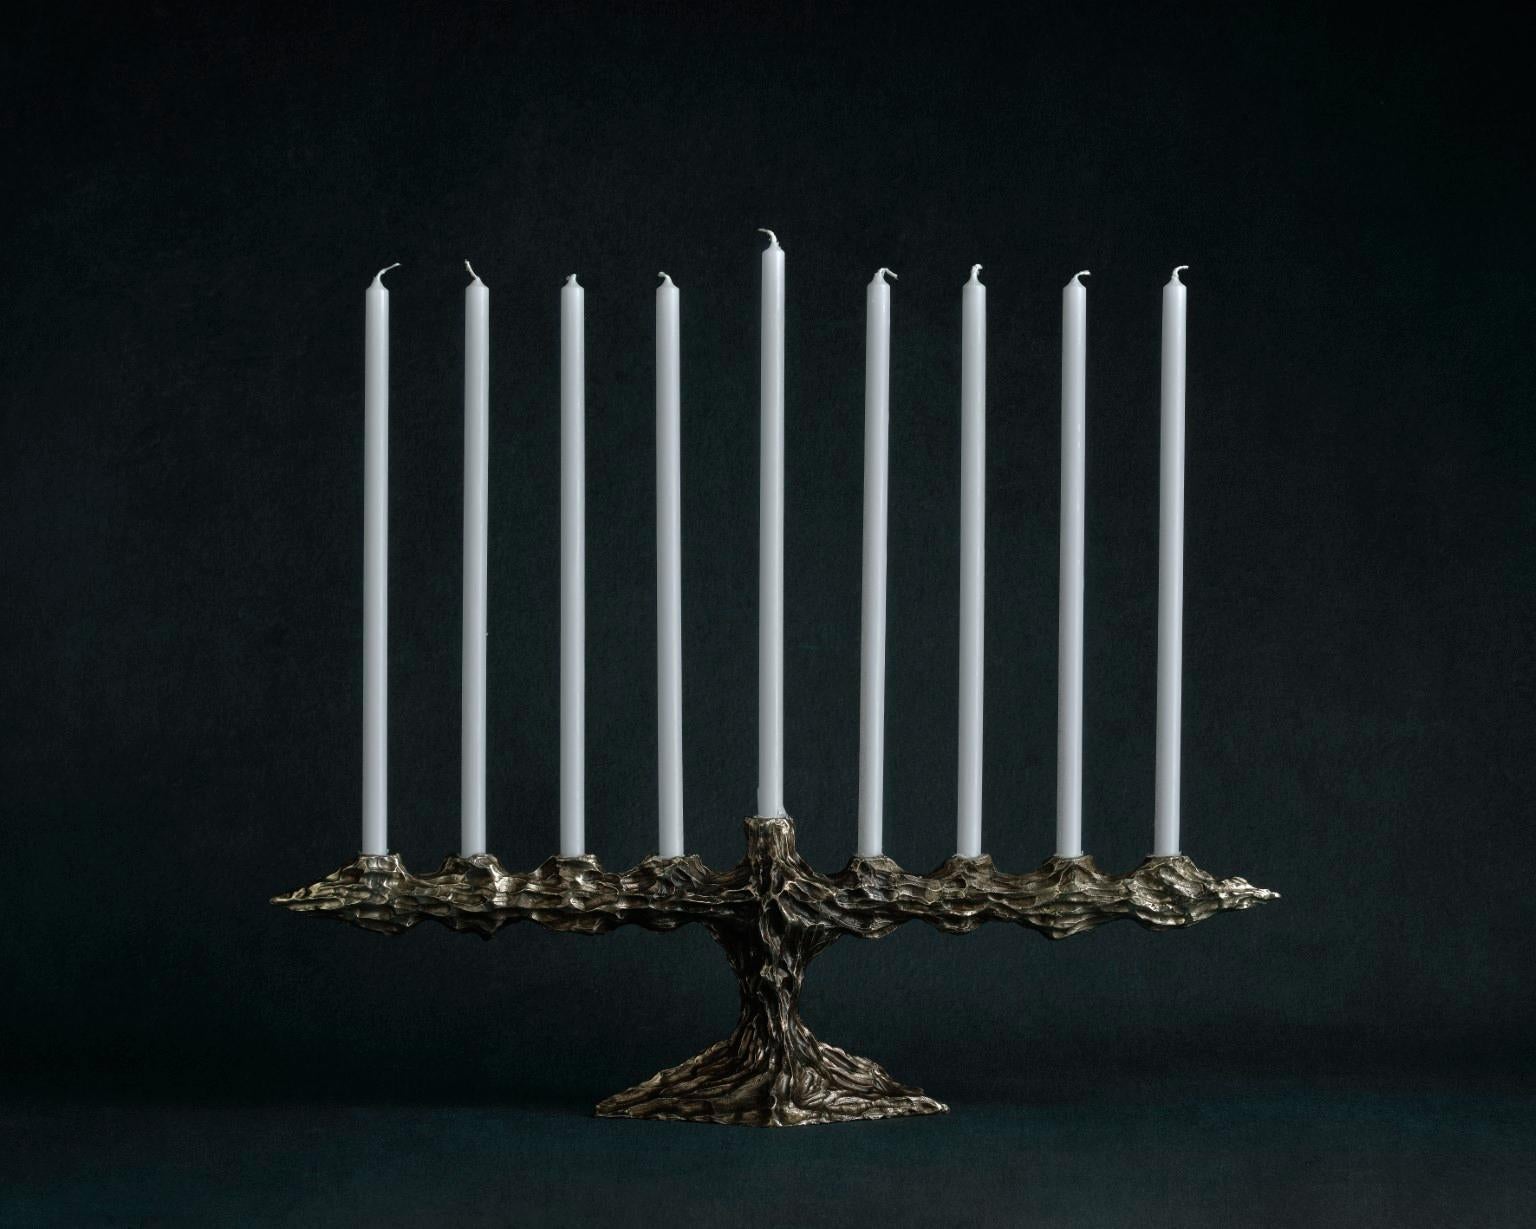 Bronze sculpted hannukah Menorah by William Guillon
Exclusively for Galerie Philia
Limited edition of 8, signed and numbered
Dimensions : W 52 x D 10 H 15 cm (42 cm with the candles) 
Materials: white silvered bronze
Hand-sculpted so each one